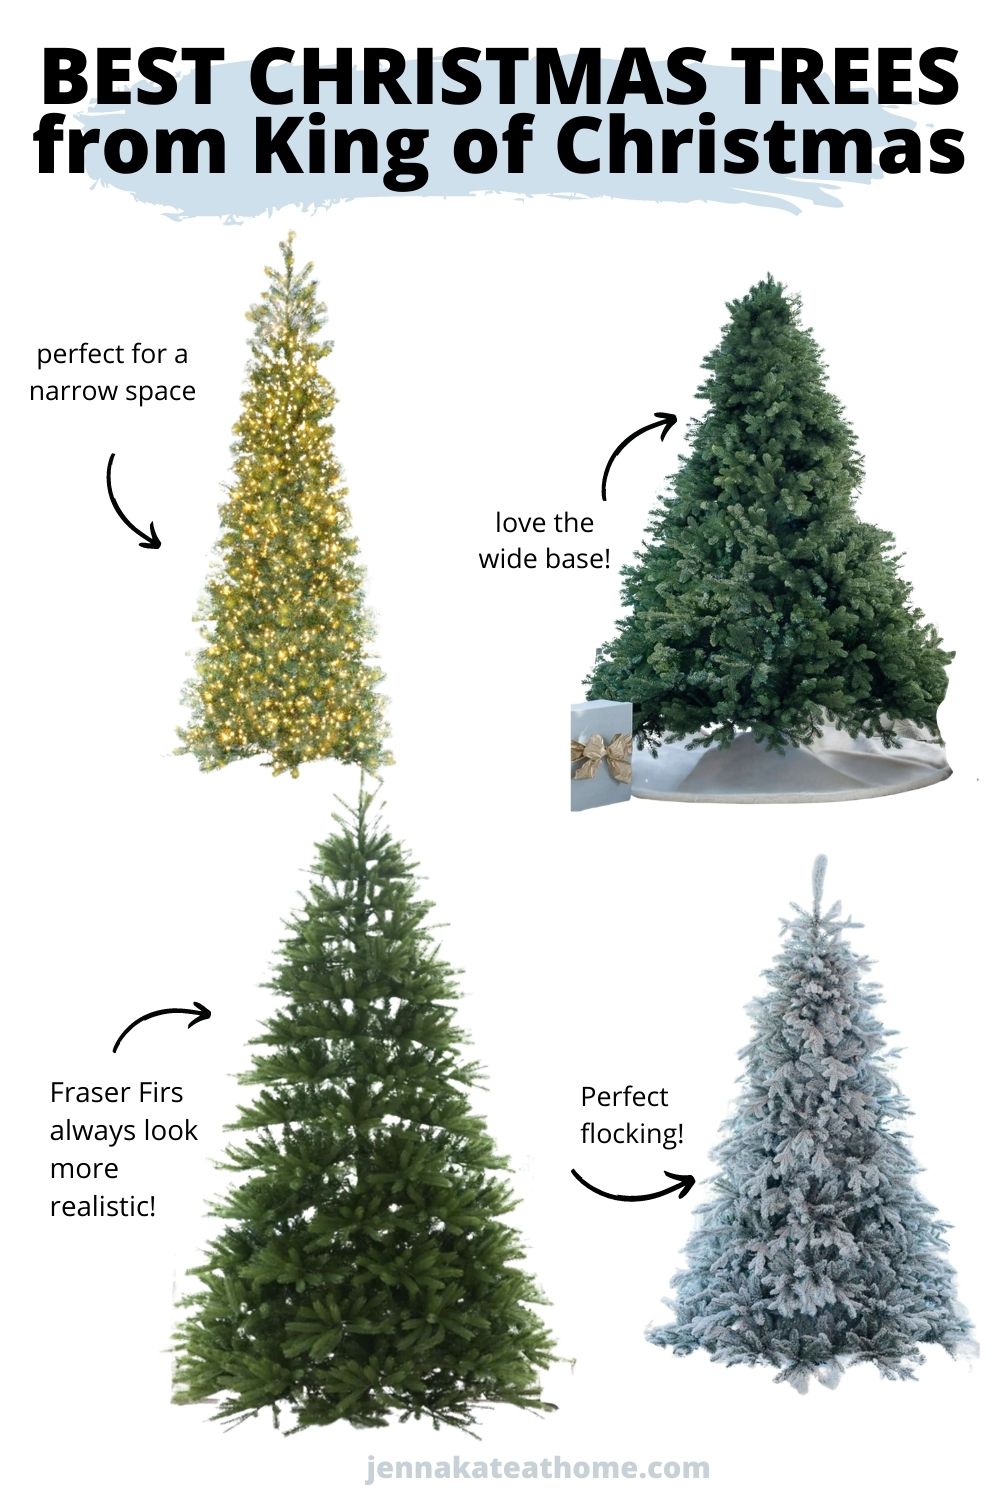 Collage of King of Christmas best artificial Christmas trees